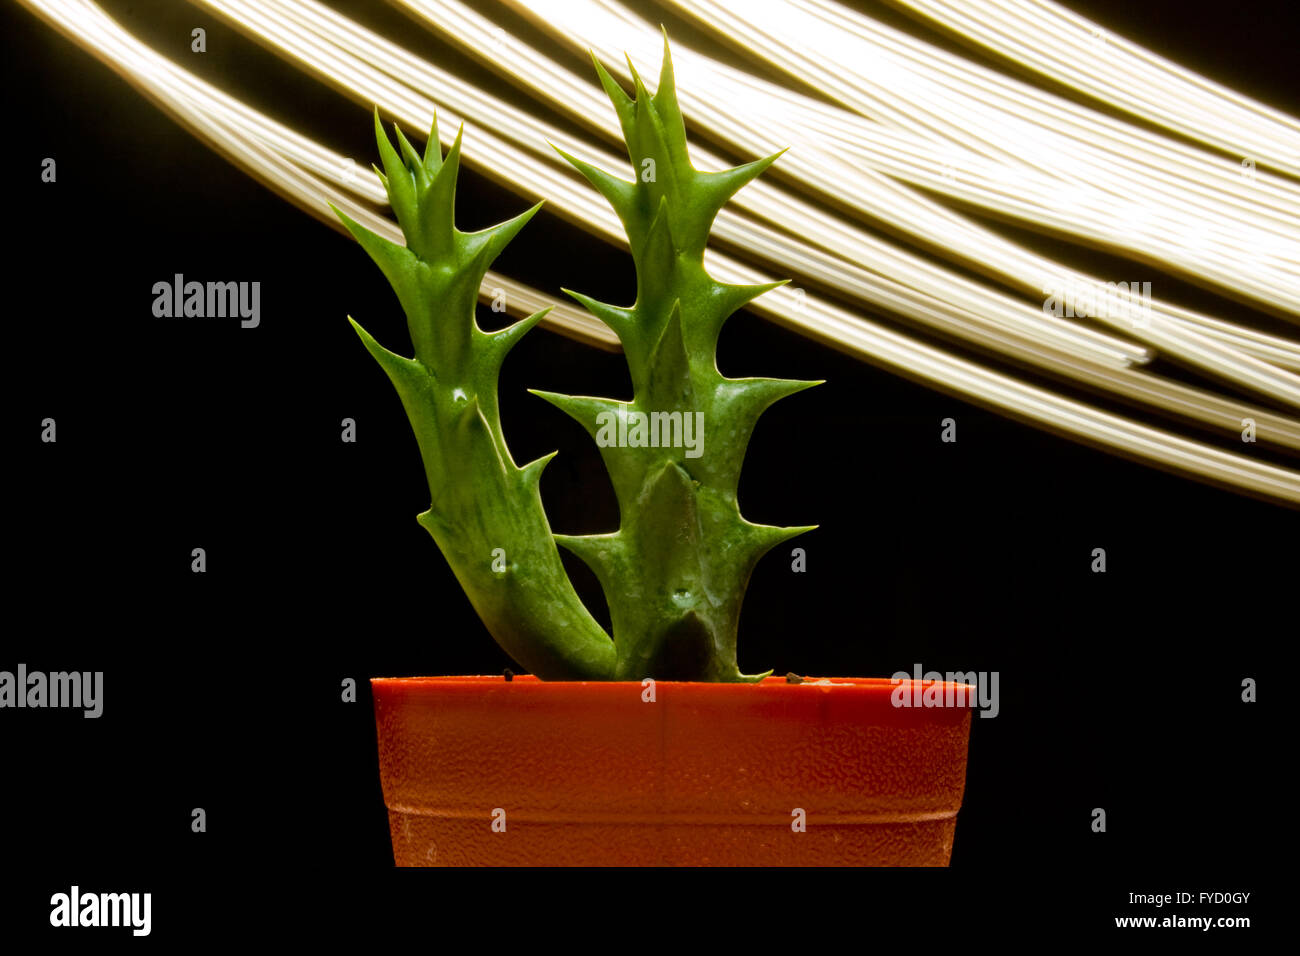 Huernia, a plant like cactus, with black background and light stream. Stock Photo